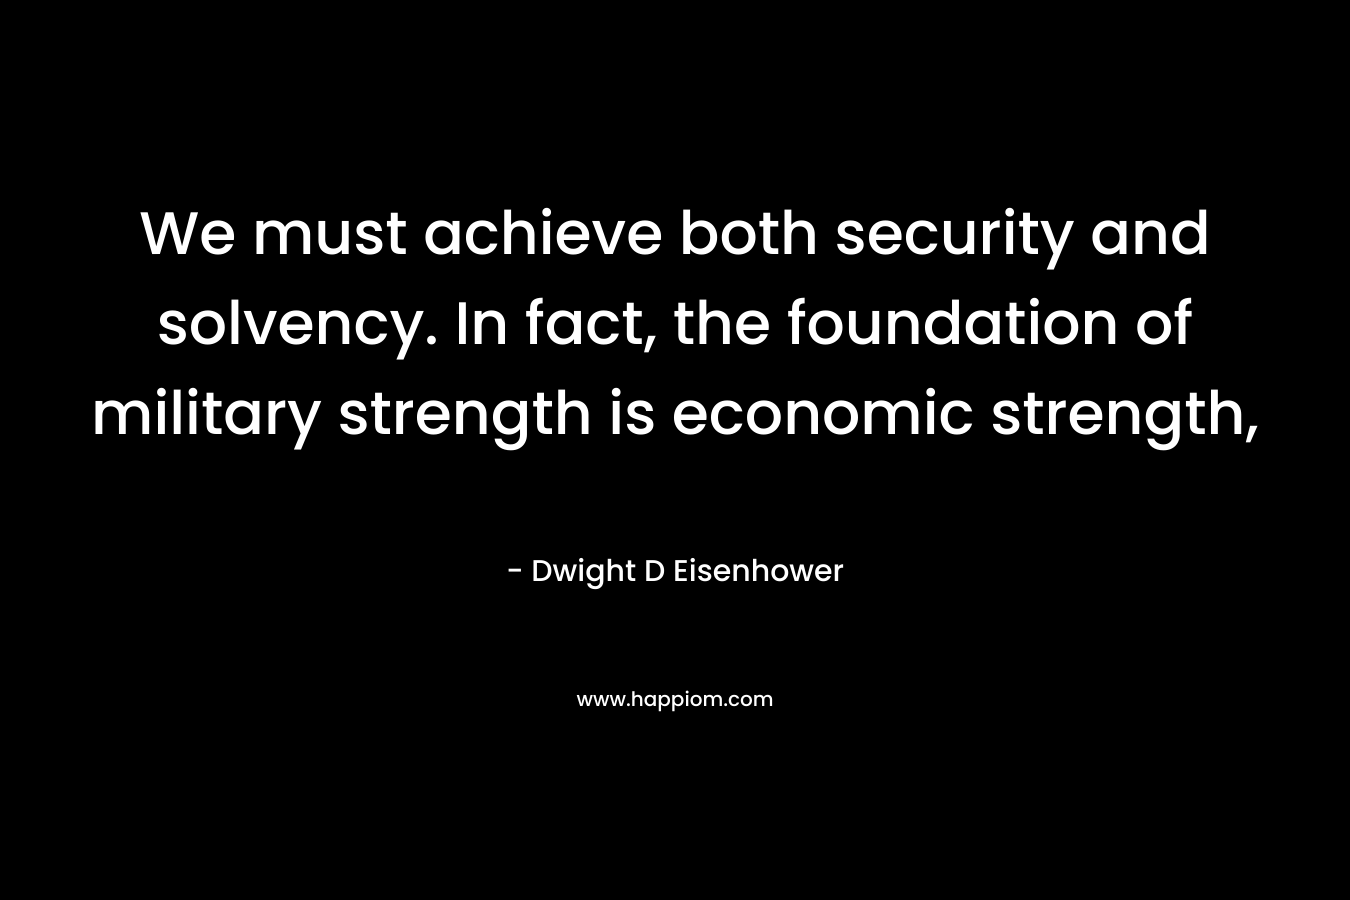 We must achieve both security and solvency. In fact, the foundation of military strength is economic strength,